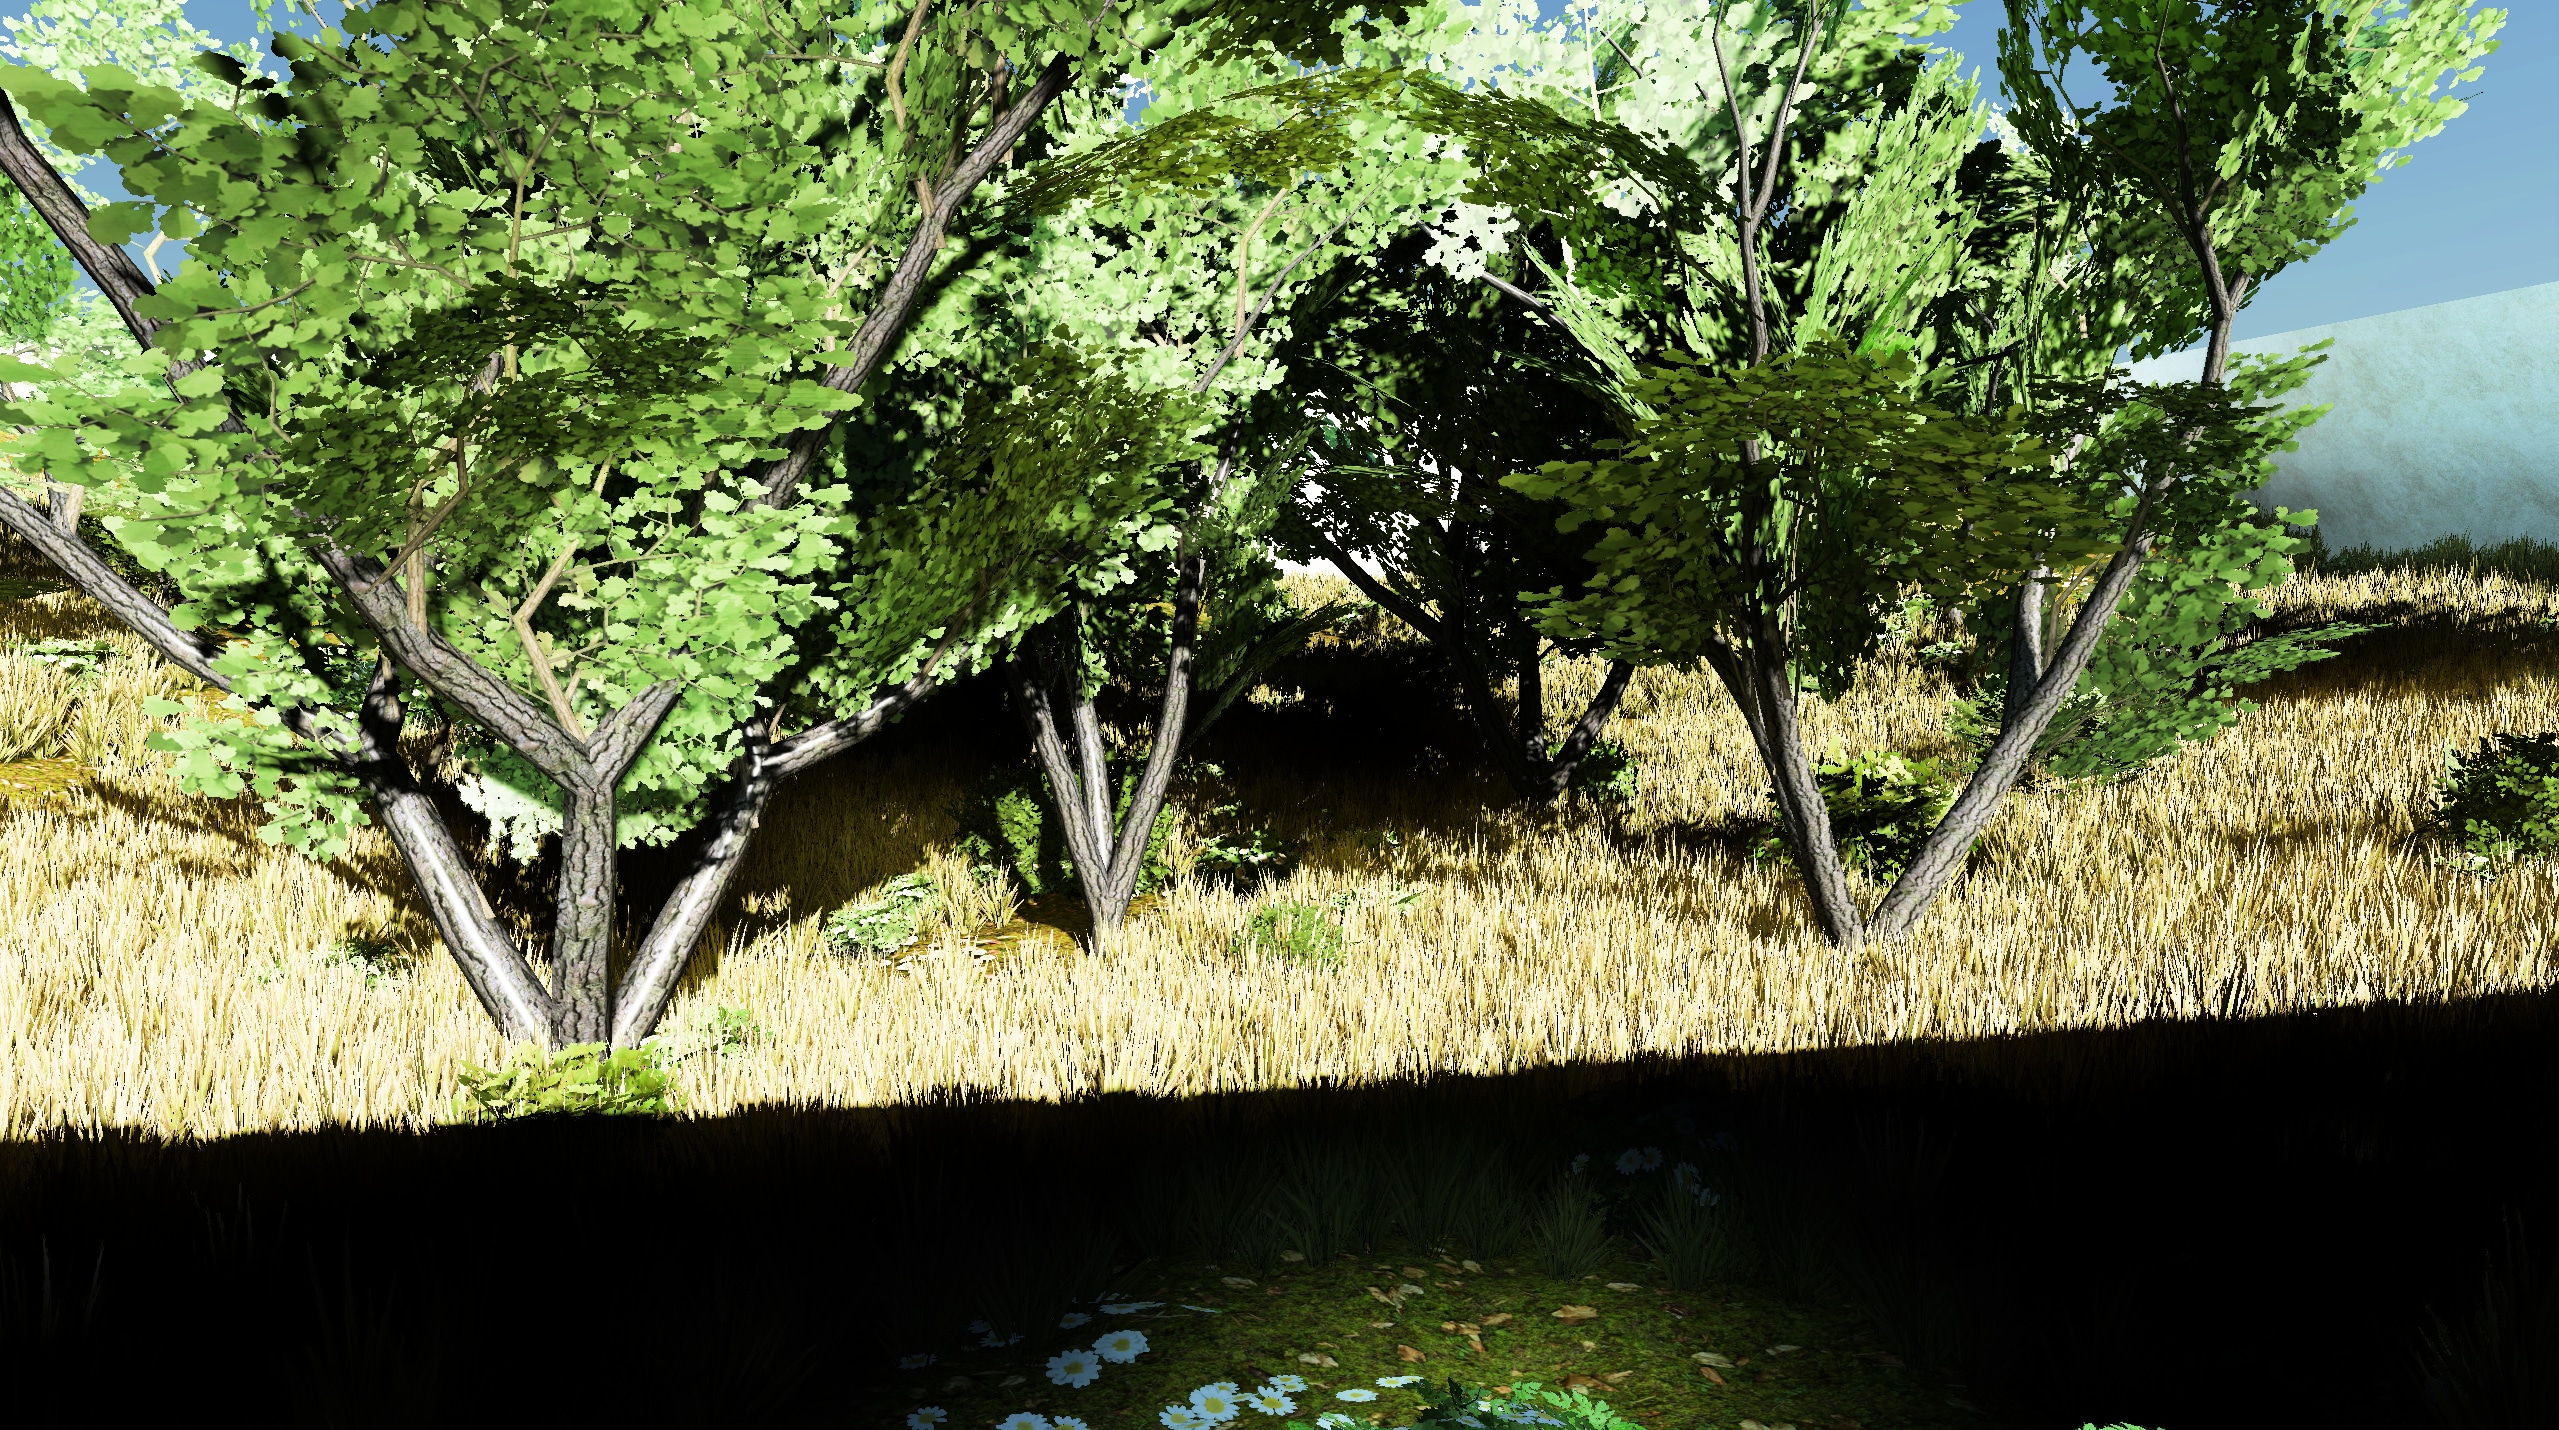 A foliage-heavy scene tested with Brixelizer GI